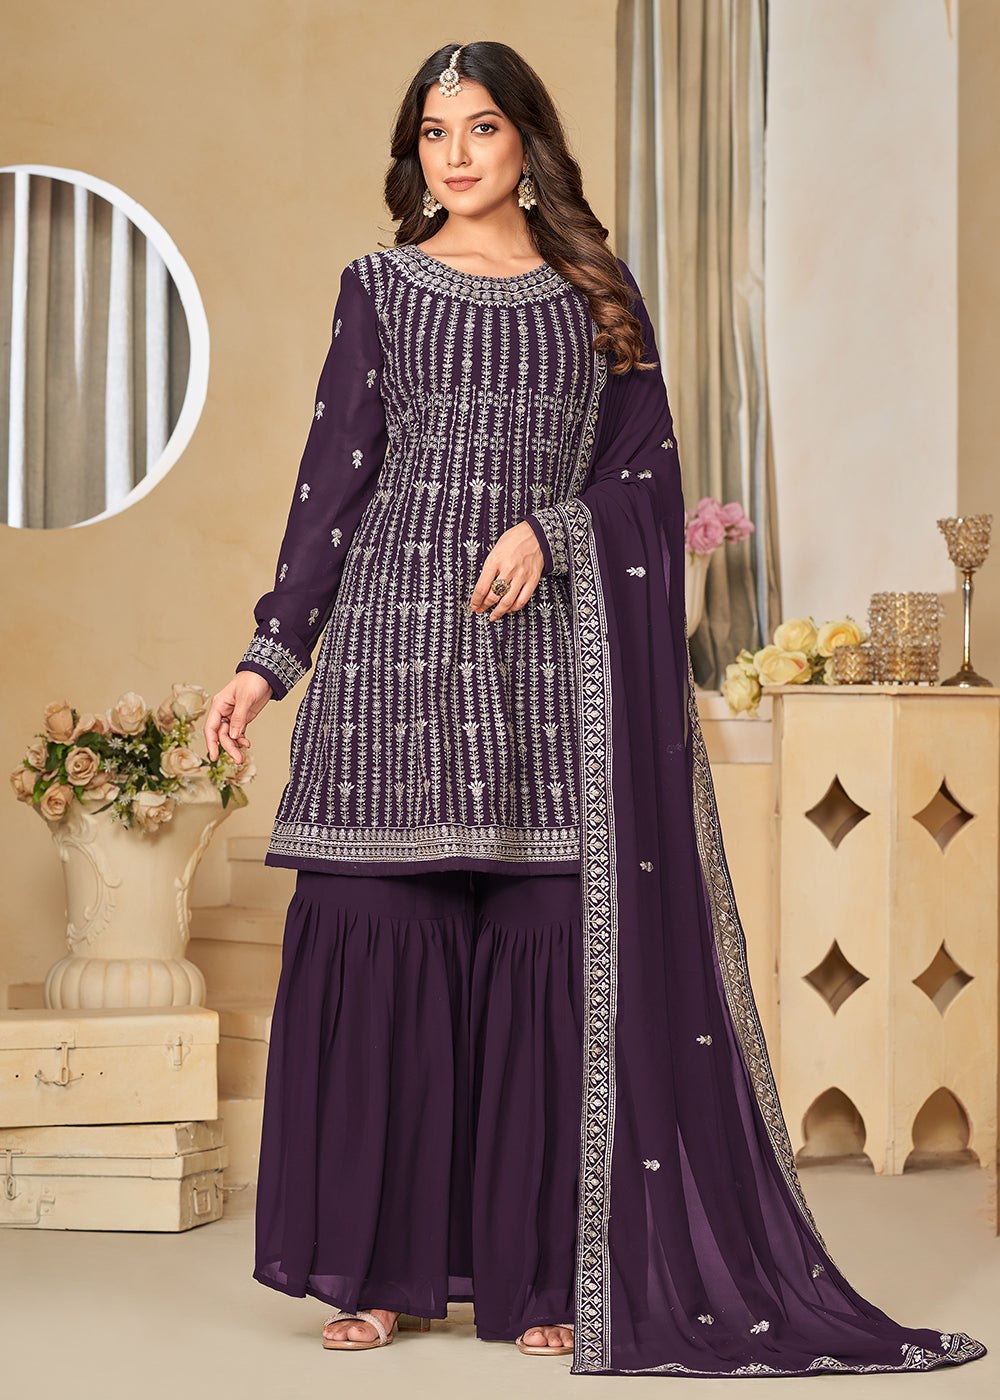 Shop Now Faux Georgette Purple Embroidered Gharara Style Suit Online at Empress Clothing in USA, UK, Canada, Italy & Worldwide. 